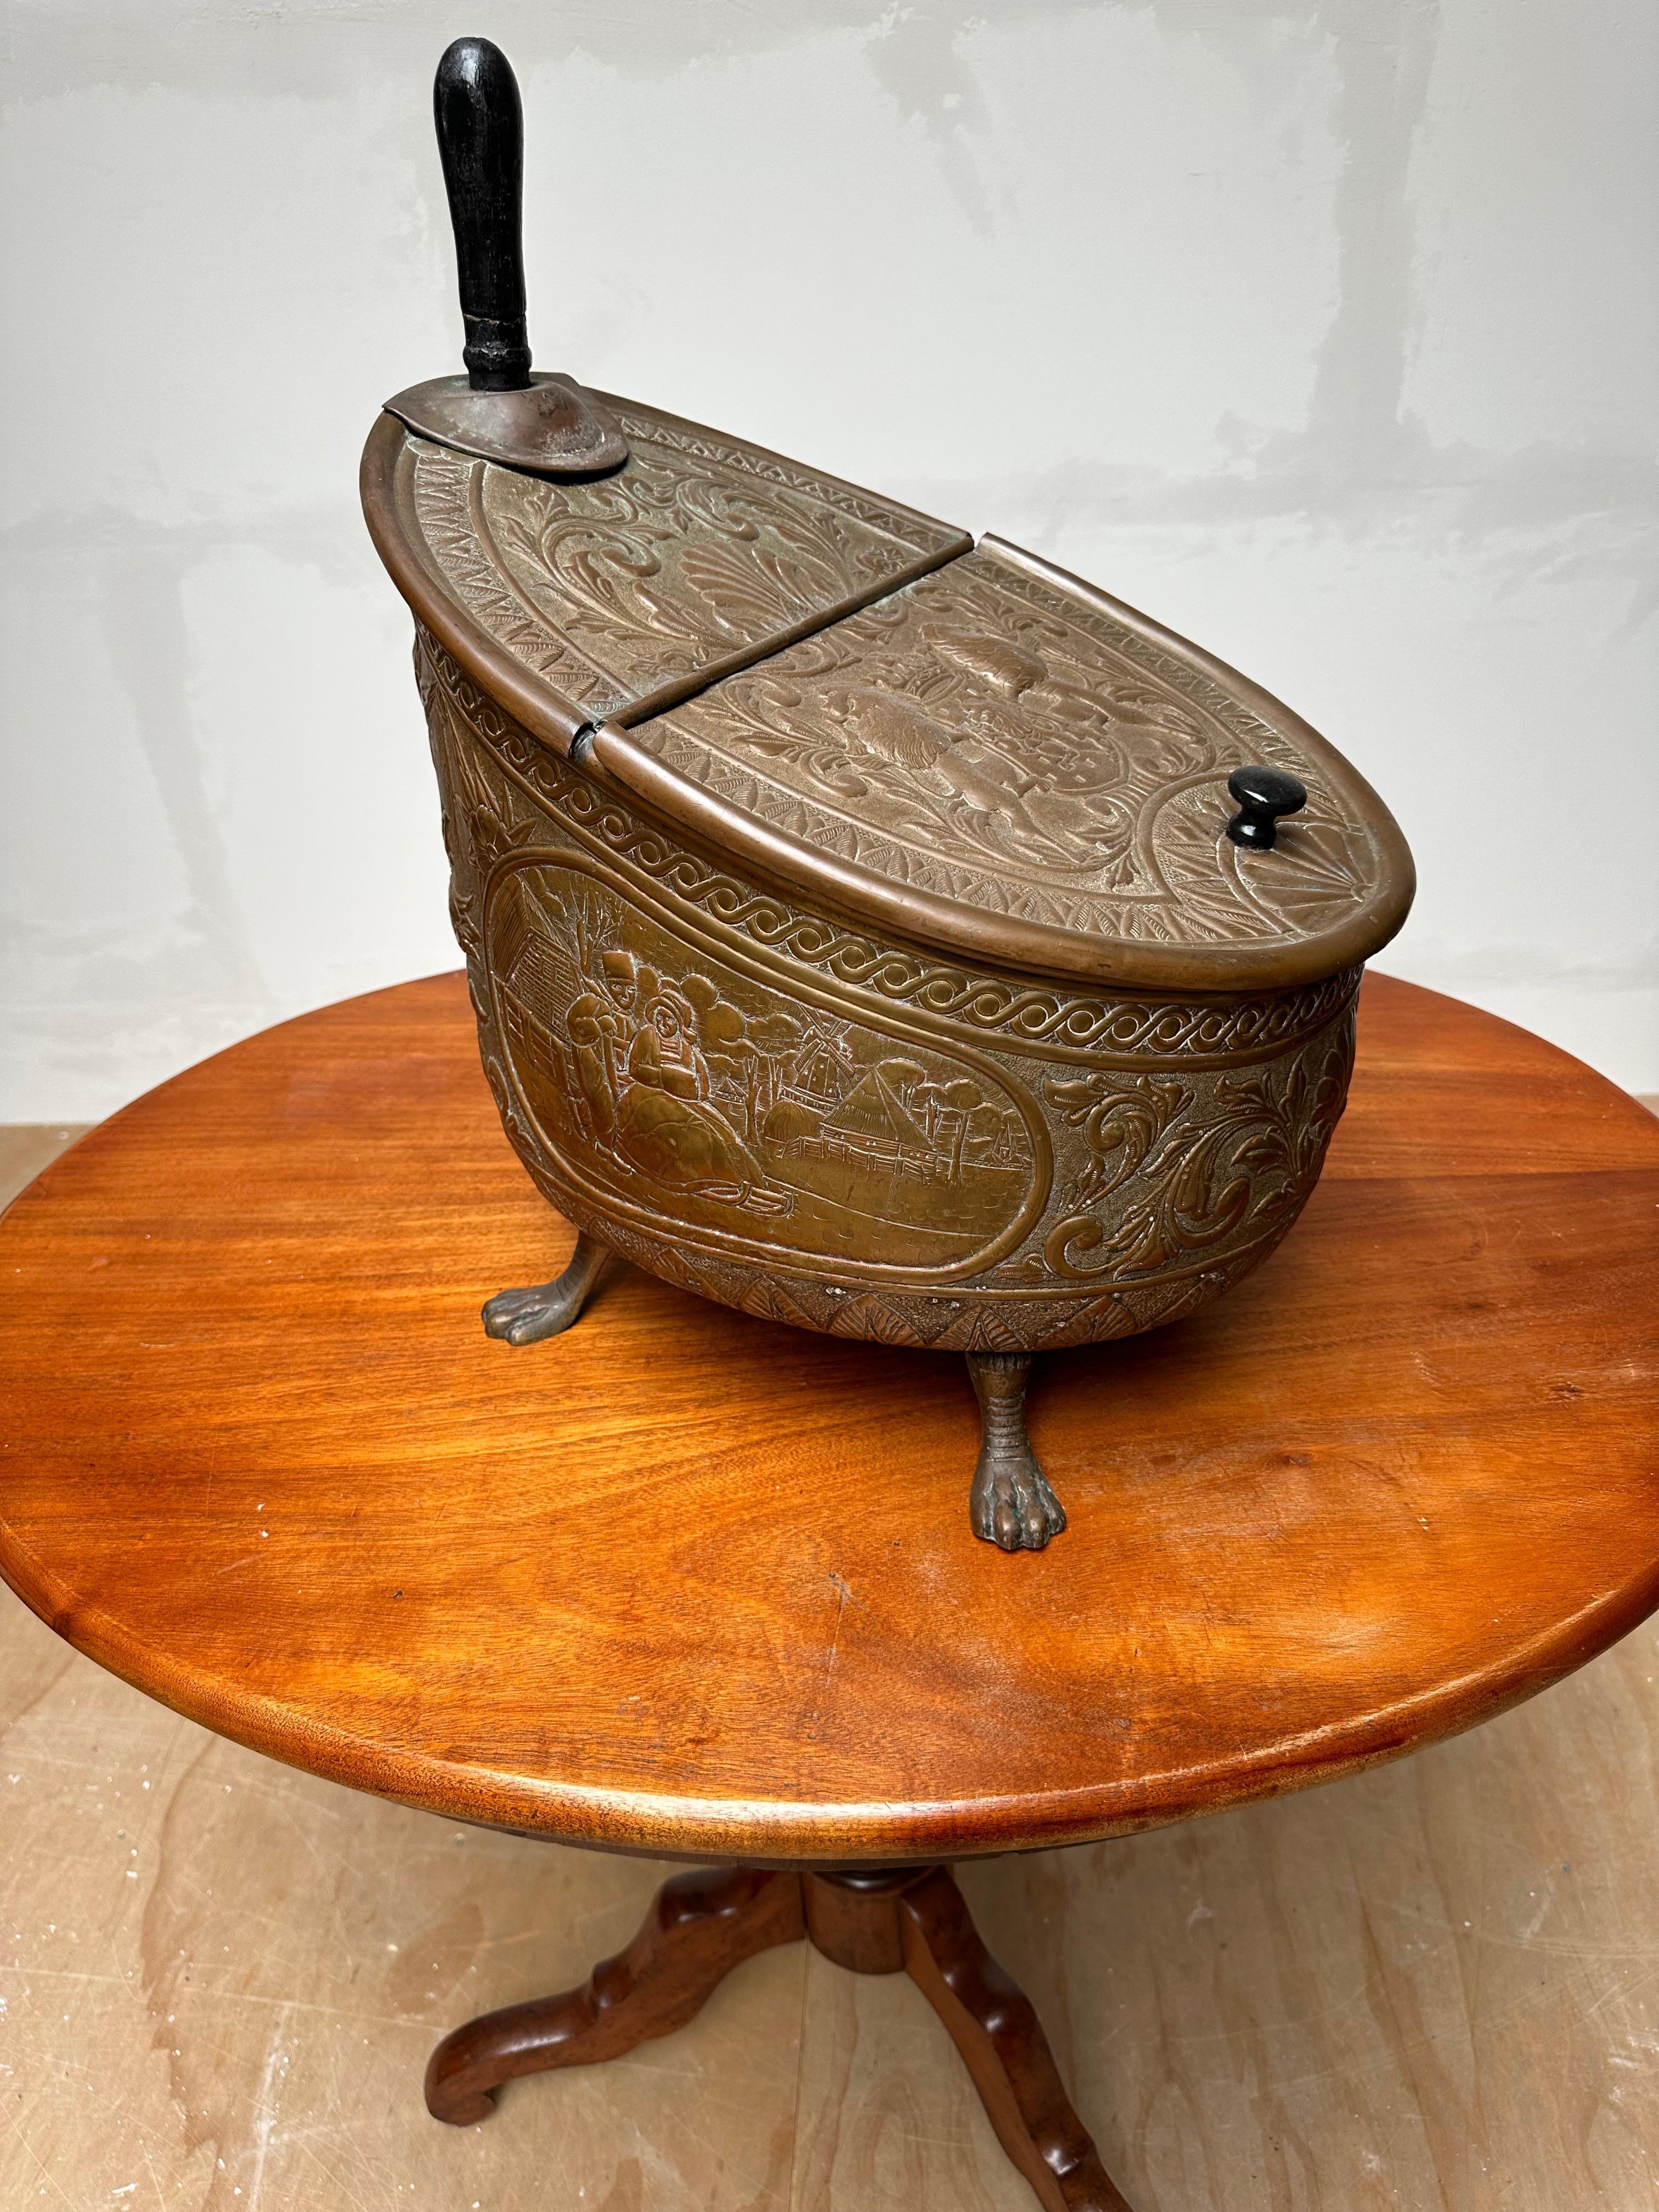 Stunning workmanship bucket with Lion's crest and showing the outdoor activities of Dutch farmers.

In the Dutch Biedermeier era this handcrafted coal bucket would have graced the fireplace of a proud to be Dutch individual. Many of the Crests of